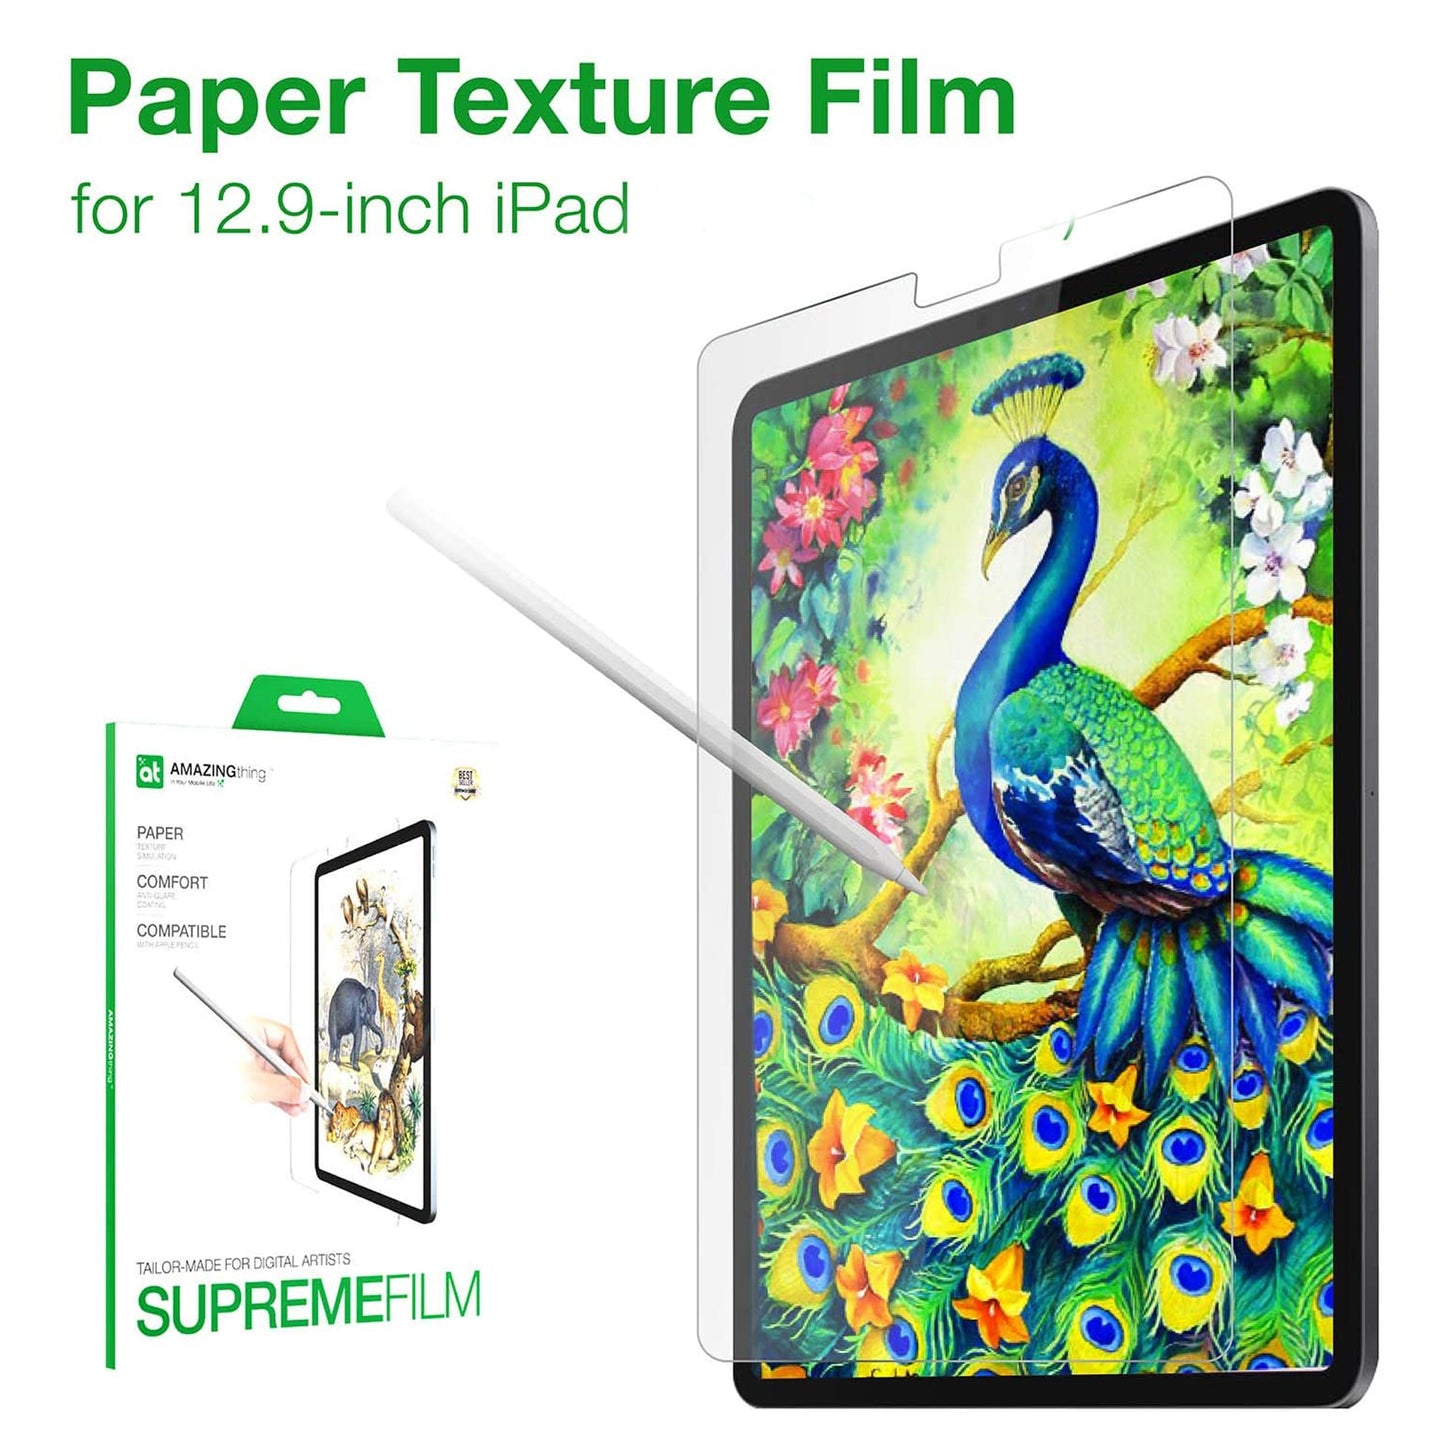 AMAZINGTHING Paperlike Texture Simulation Drawing Film for iPad Pro 12.9" ( 5th - 4th - 3rd Gen) ( 2021 - 2018 ) M1 Chip - Matte (Barcode: 4892878059183 )